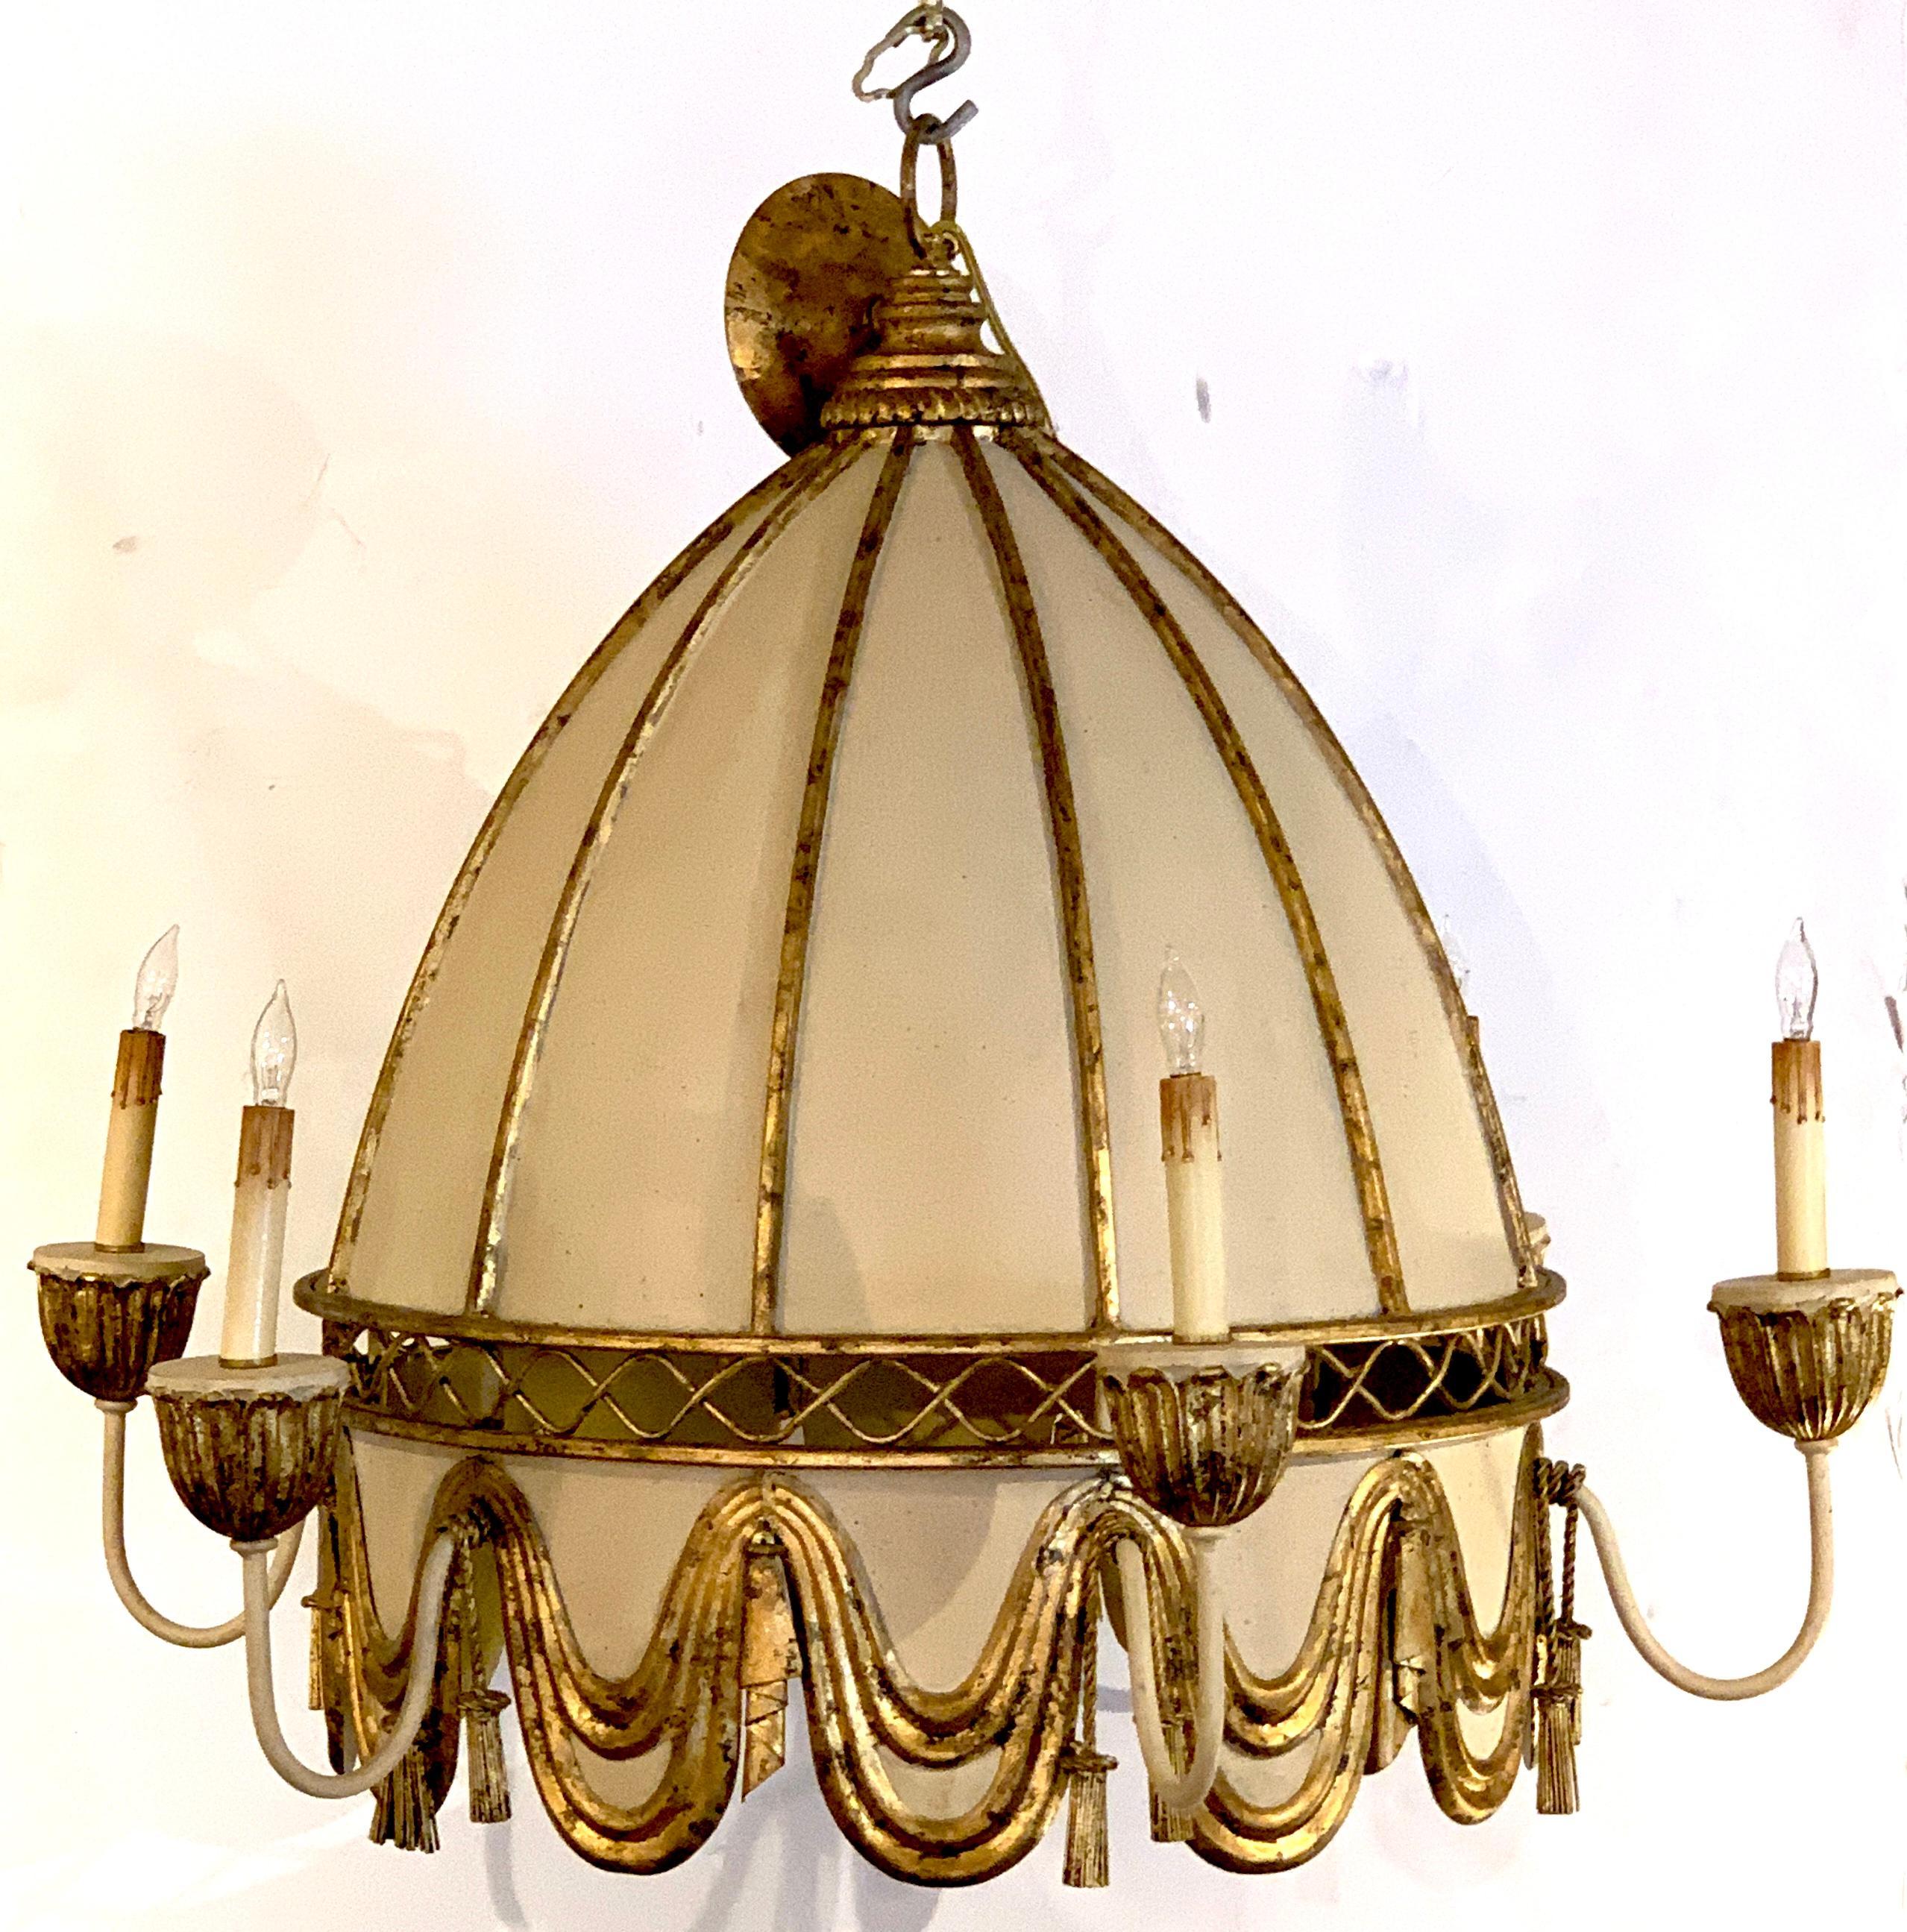 Polychromed tole pagoda style chandelier, with pierced dome top fitted with eight-light
The interior has a diameter of 23